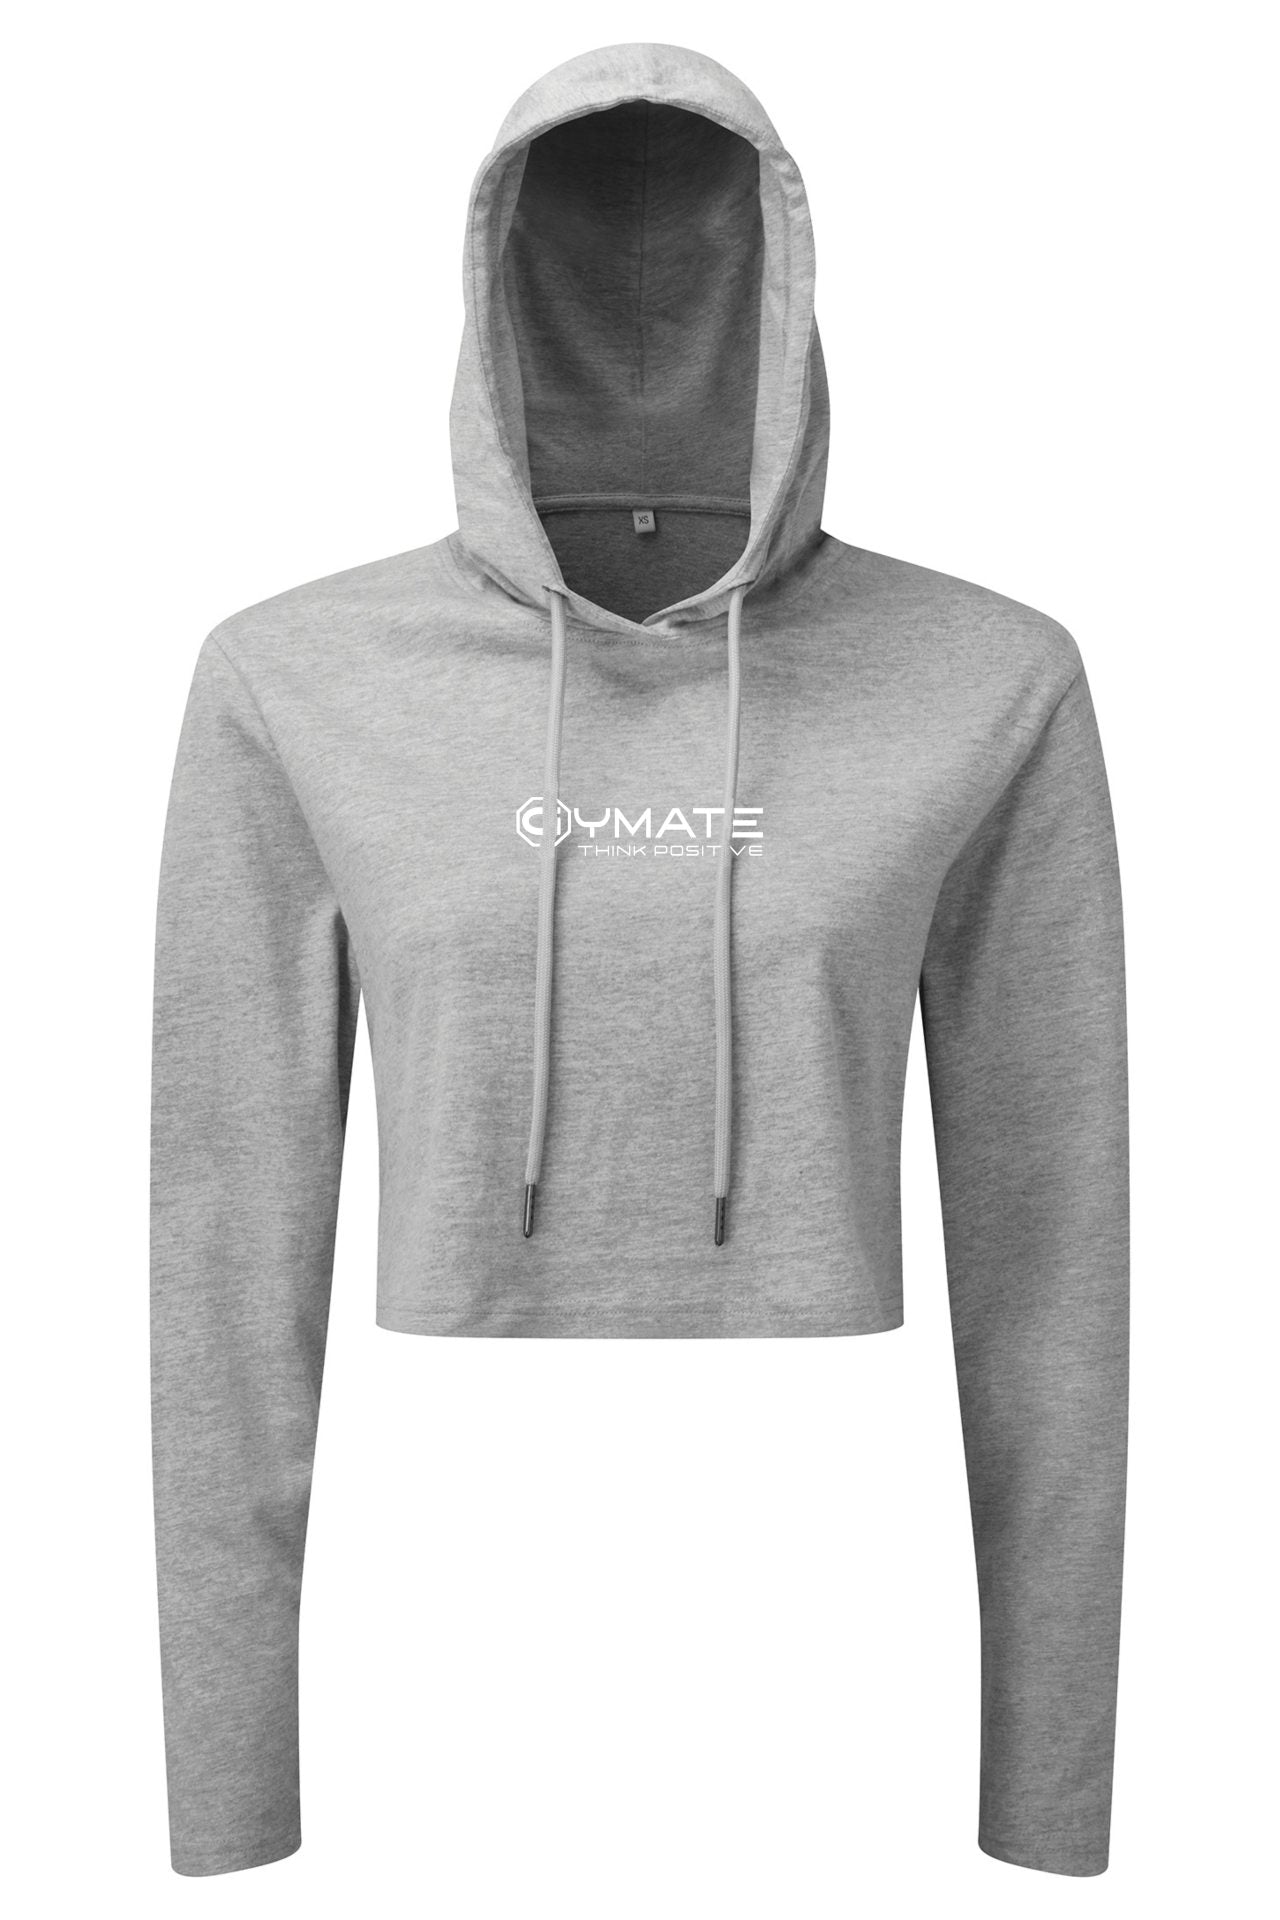 Gymate Pro cropped hooded t shirt heather grey